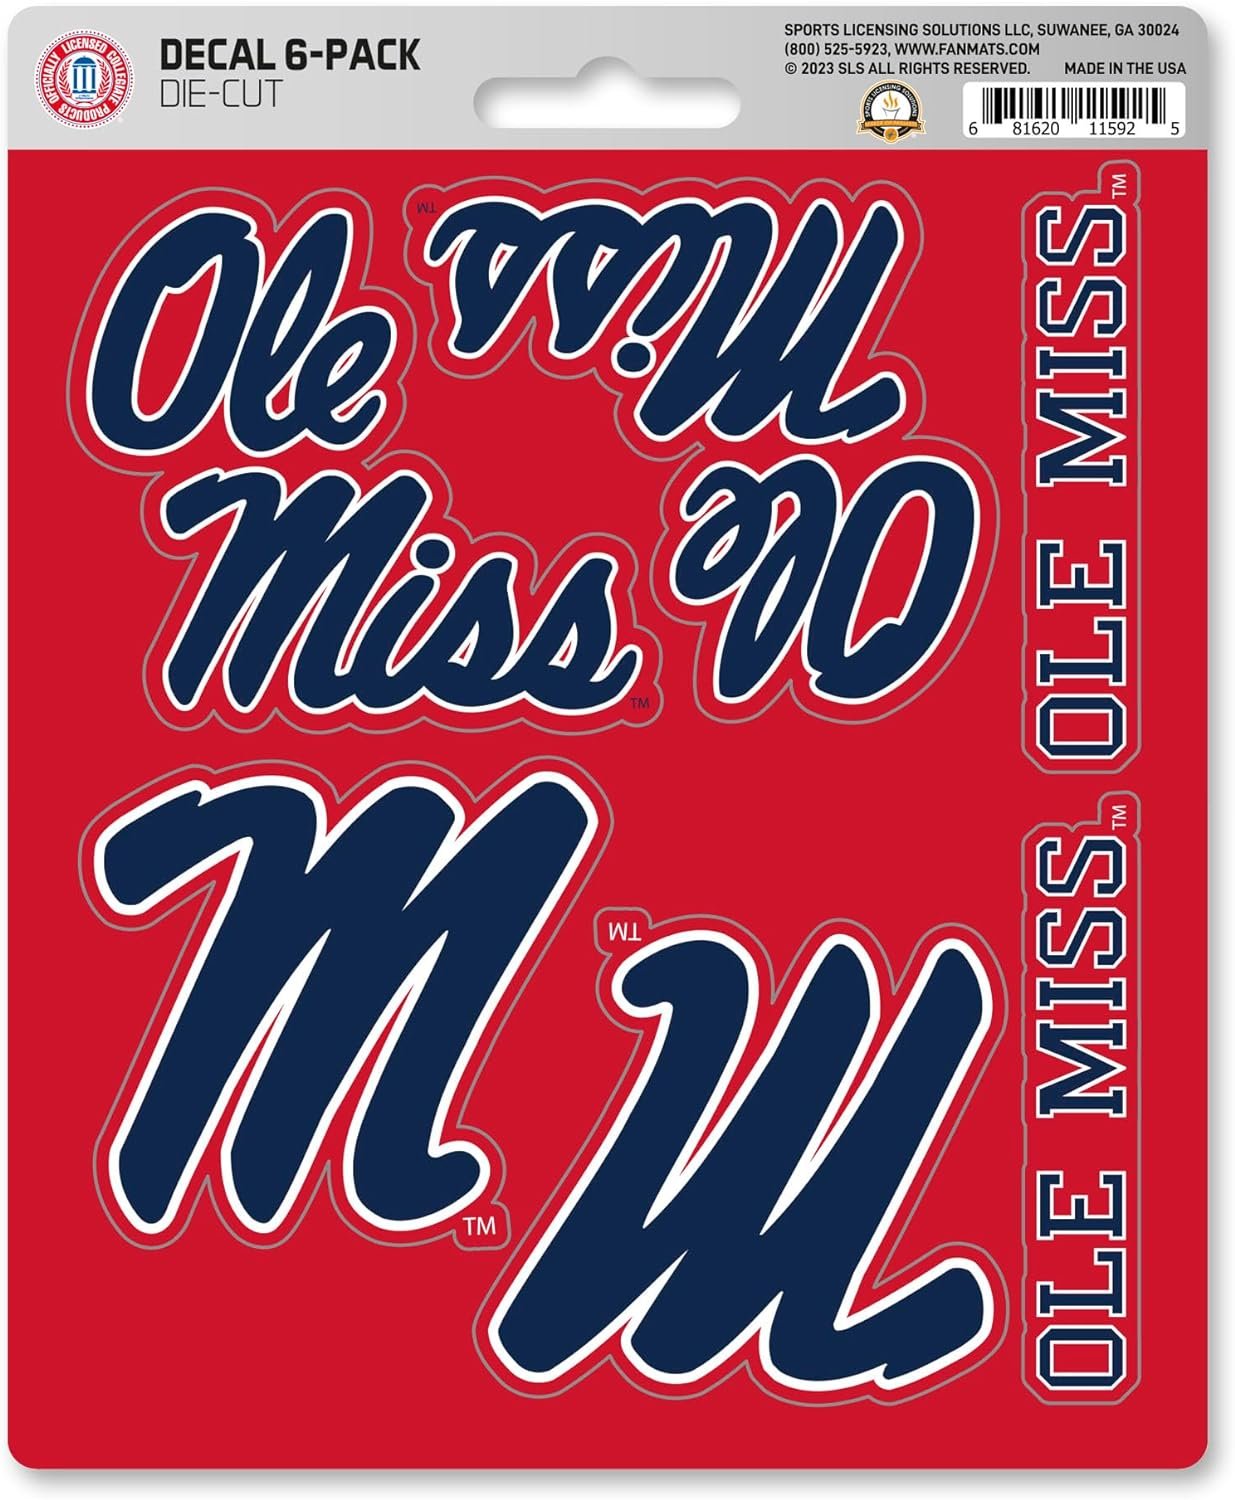 University of Mississippi Ole Miss Rebels 6-Piece Decal Sticker Set, 5x6 Inch Sheet, Gift for football fans for any hard surfaces around home, automotive, personal items